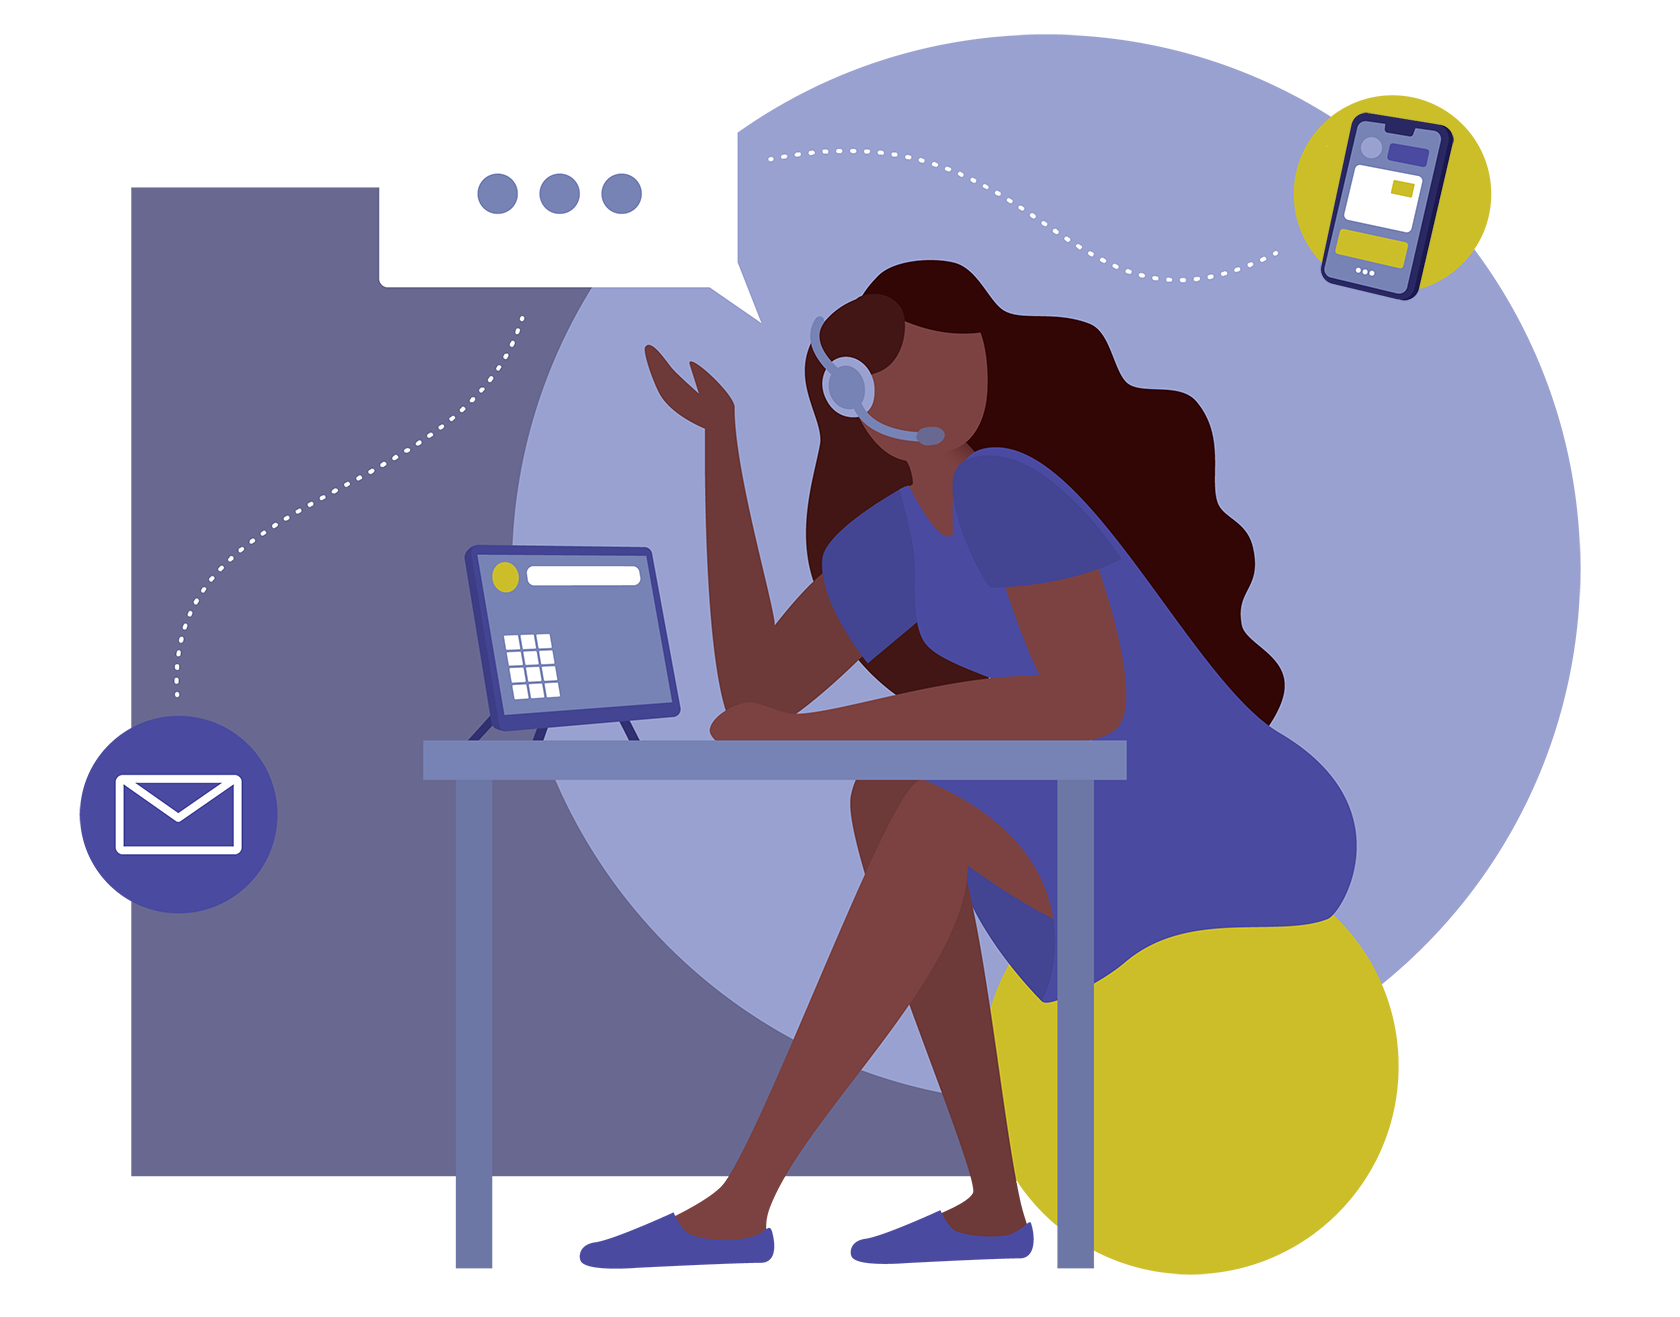 An illustration depicting a person using their desktop phone system and headset for calls and messages.